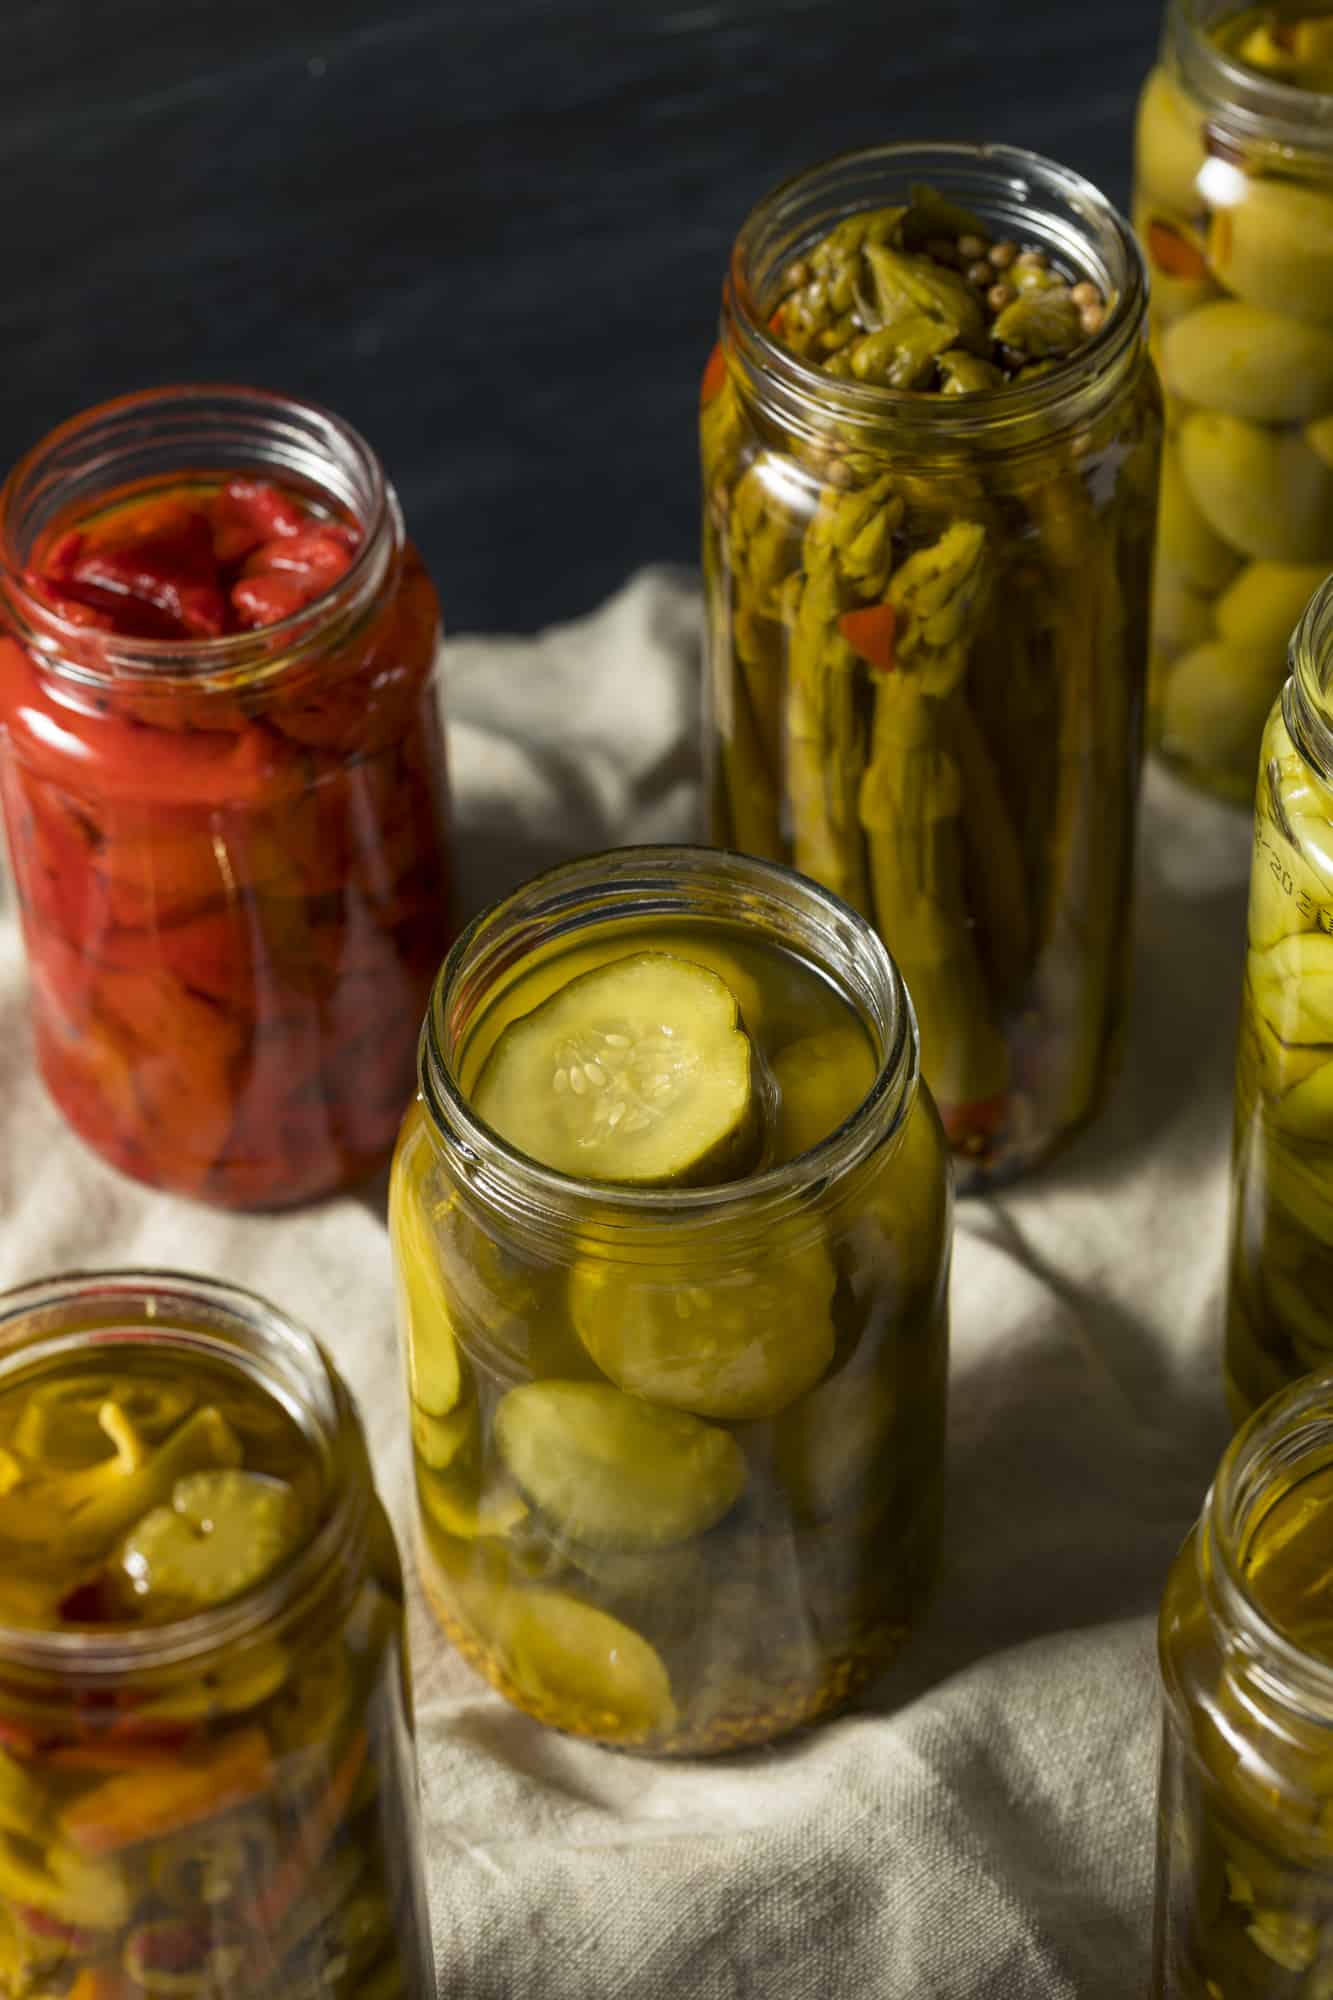 Homemade Pickled Vegetables in Jars Ready to Eat.